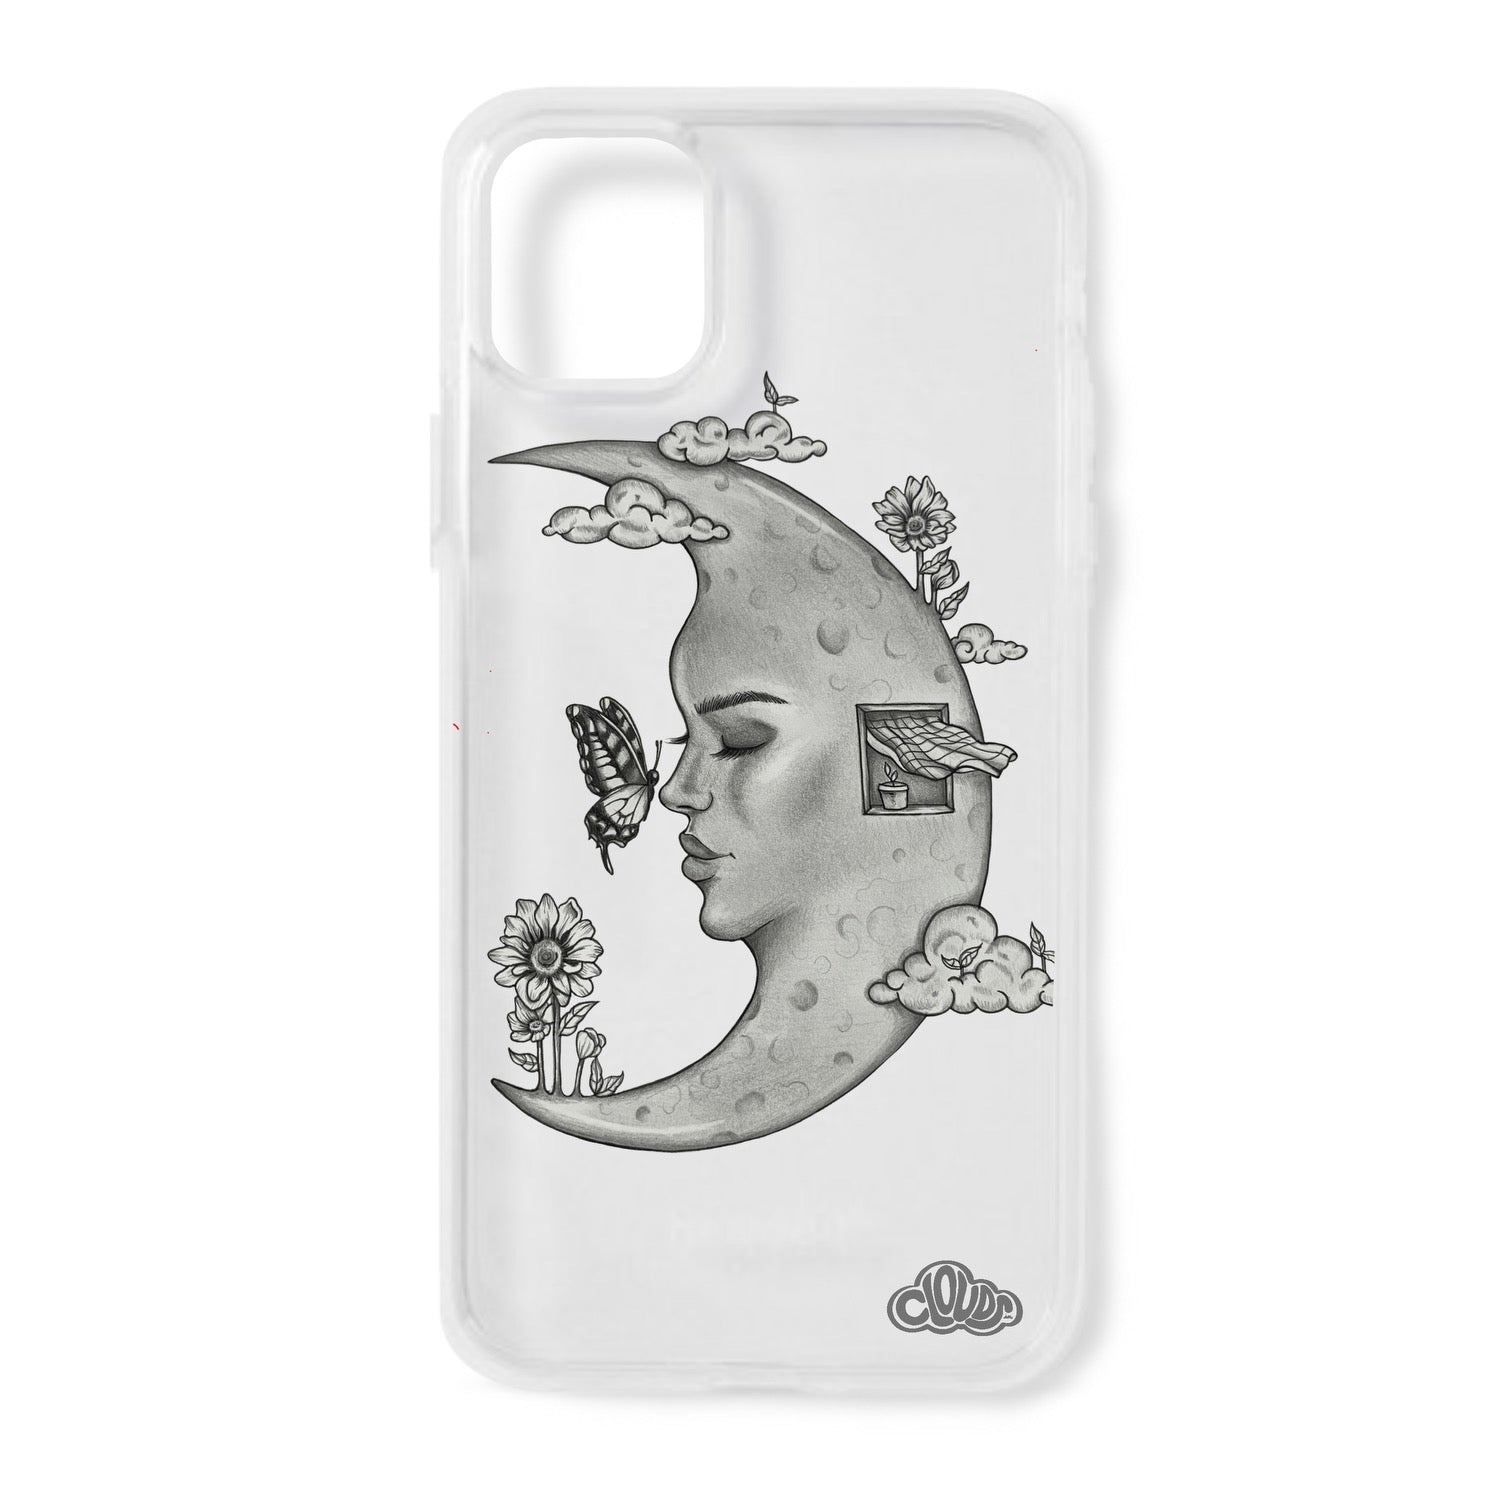 The Thoughtful Moon iPhone Case